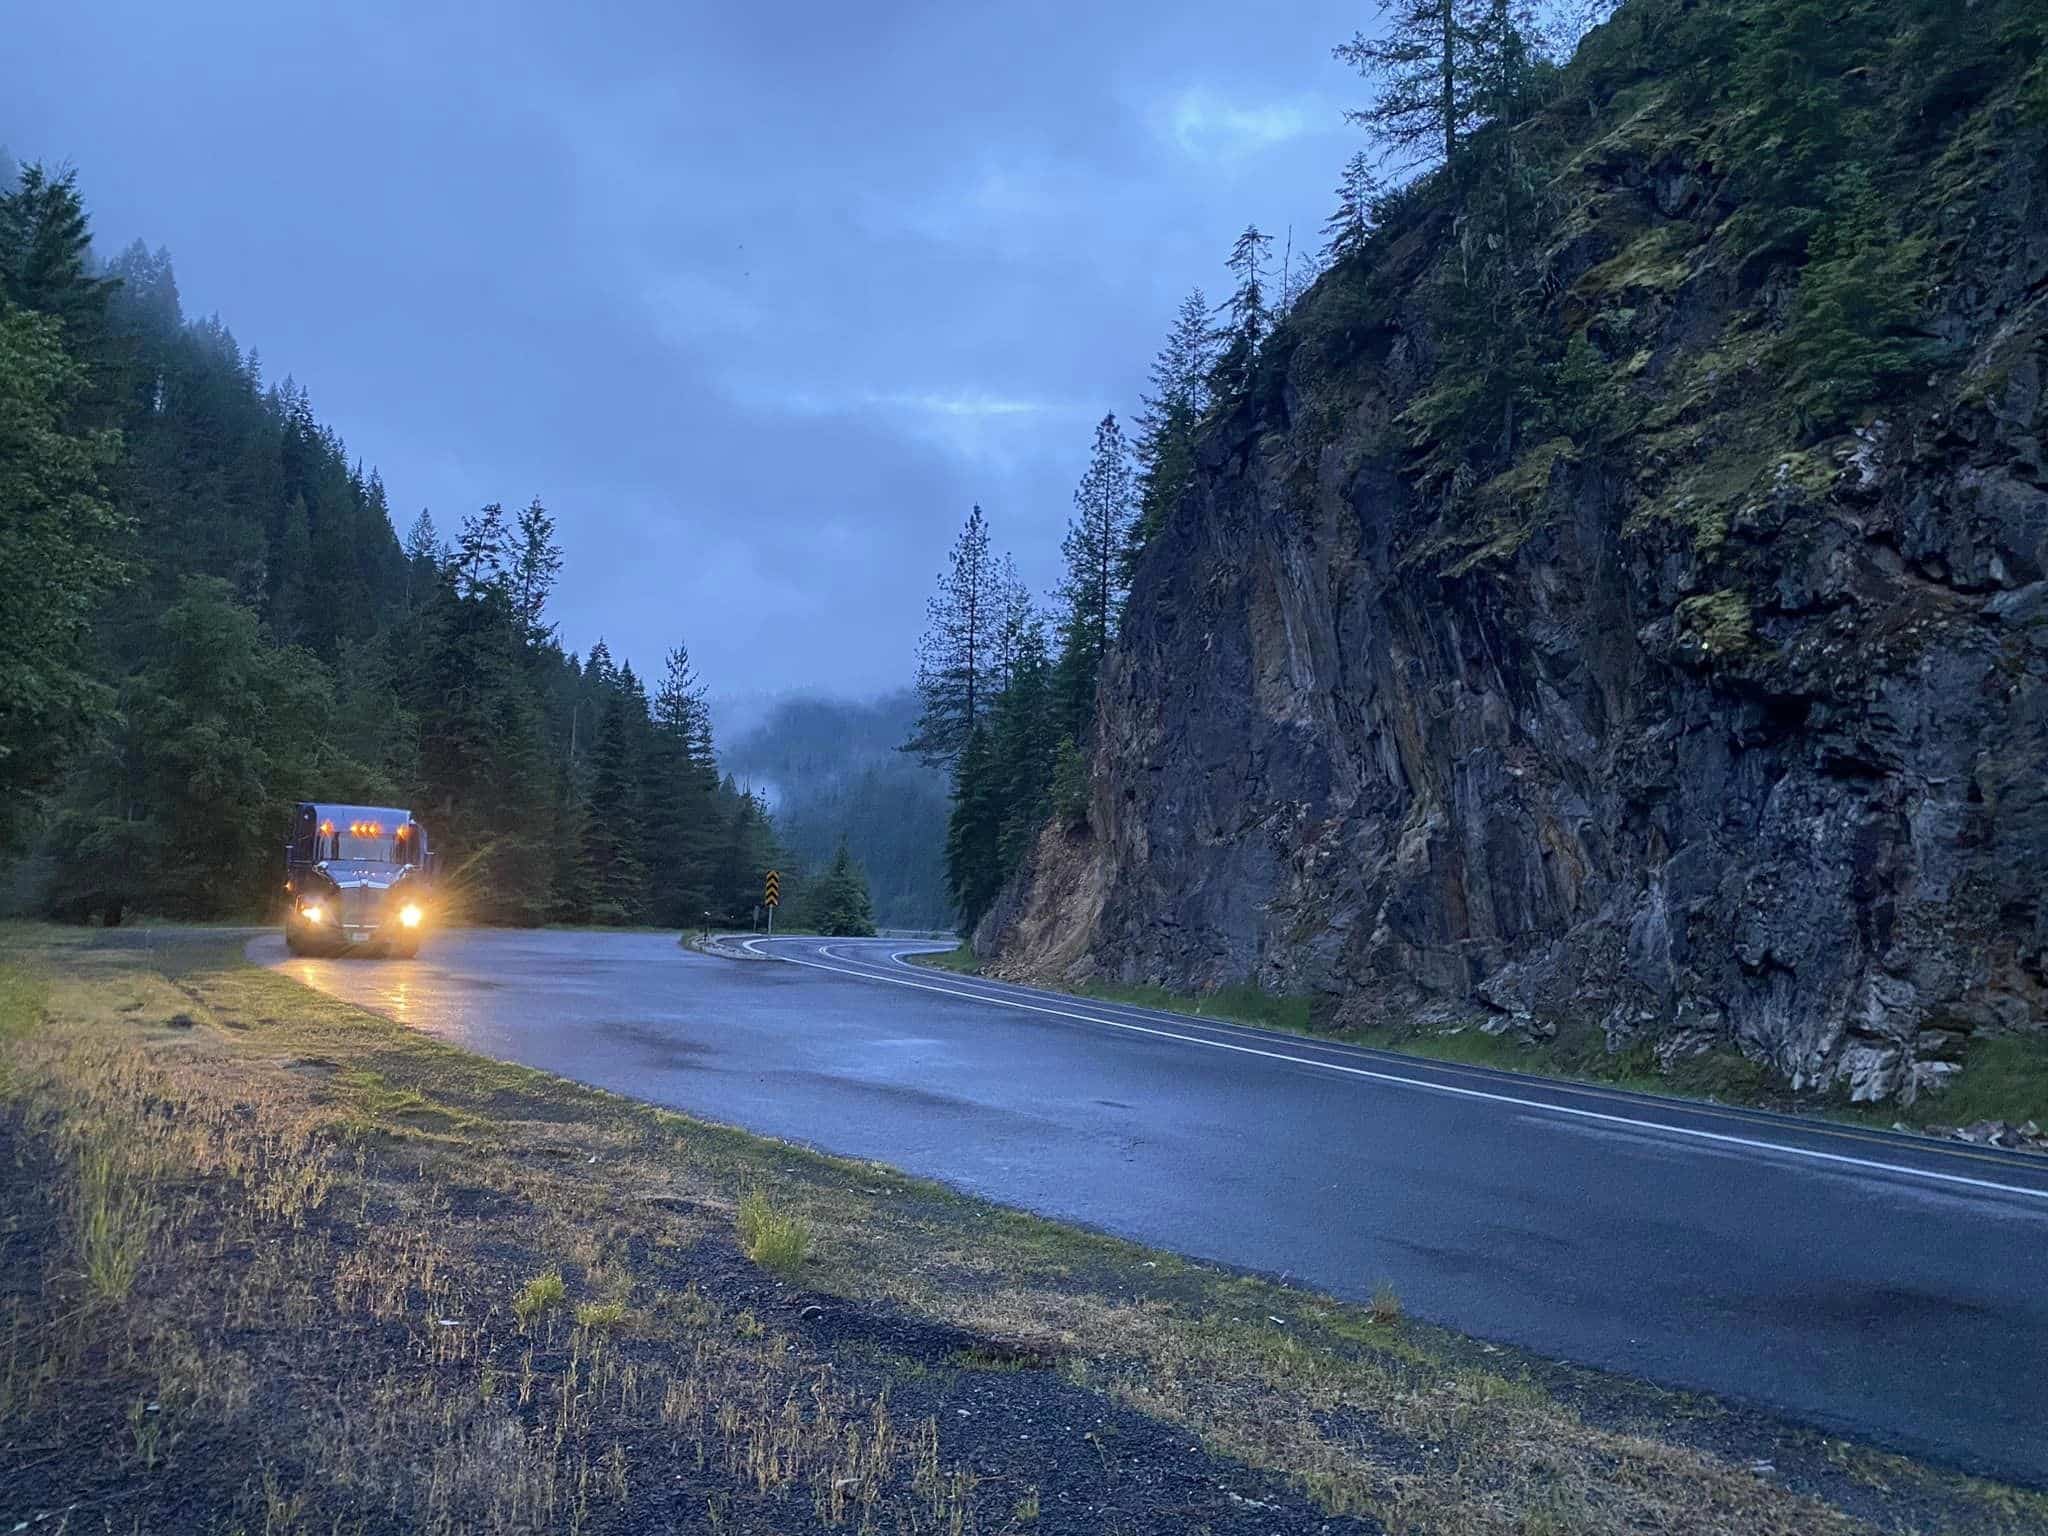 Melton truck driving through the mountains on a cloudy day.